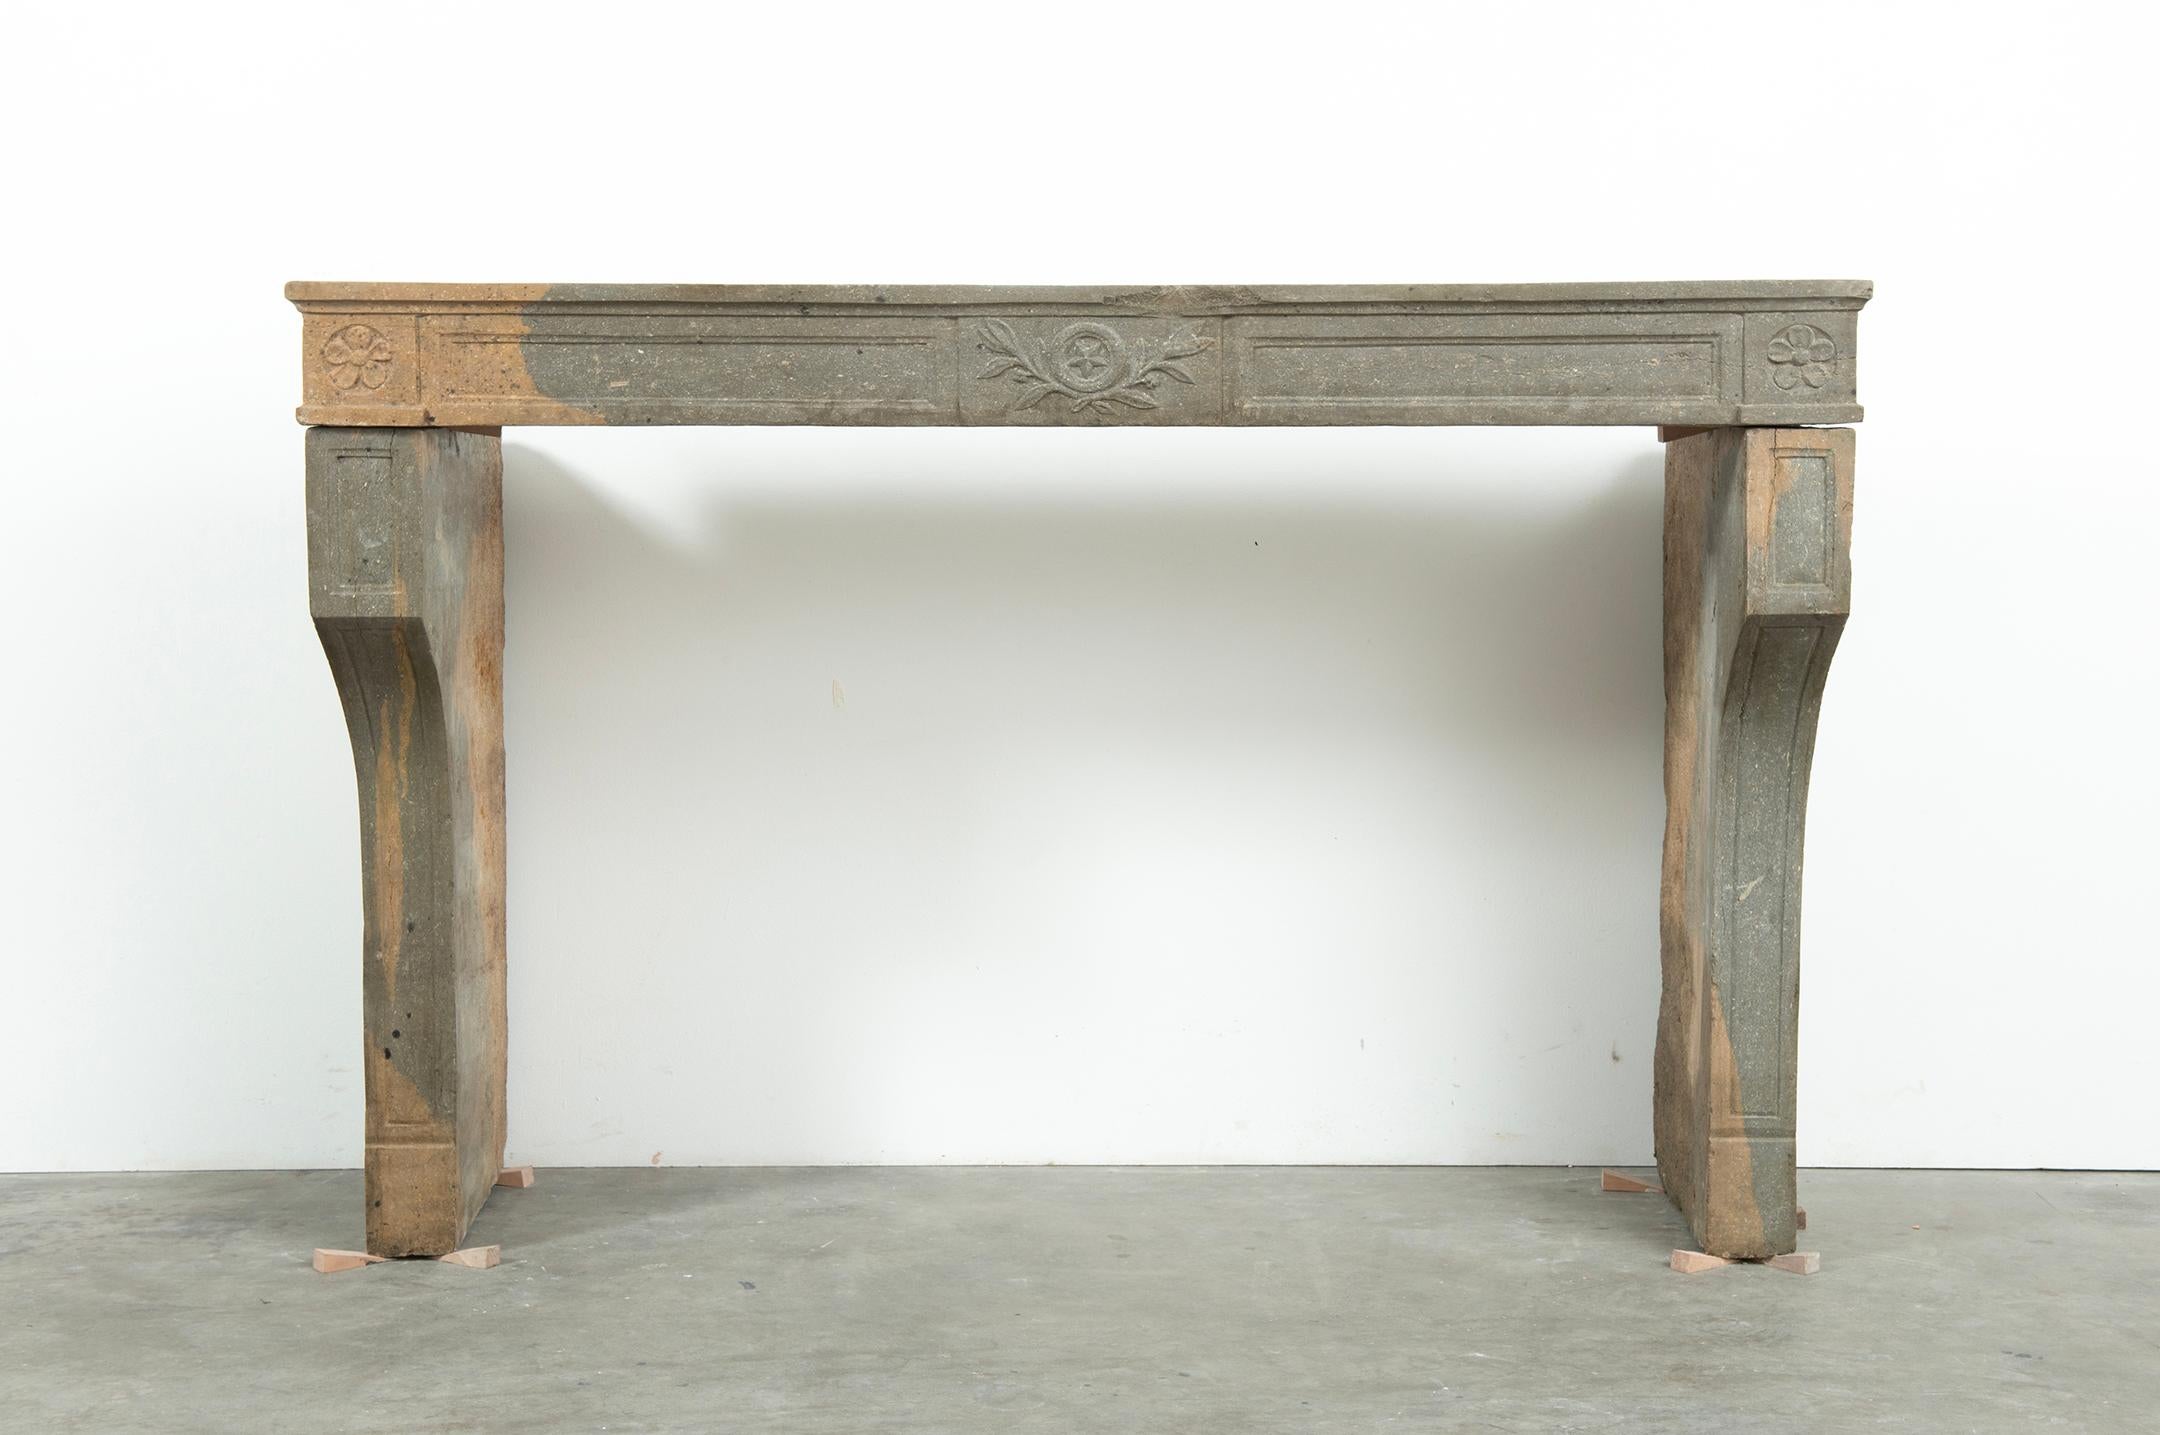 Very happy to offer this bi-color French Louis XVI Fireplace Mantel.

Coming from the Burgundy area this warm colored limestone fireplace is unrestored and still has its original patina.
The decorations, curved legs combined with the straight frieze